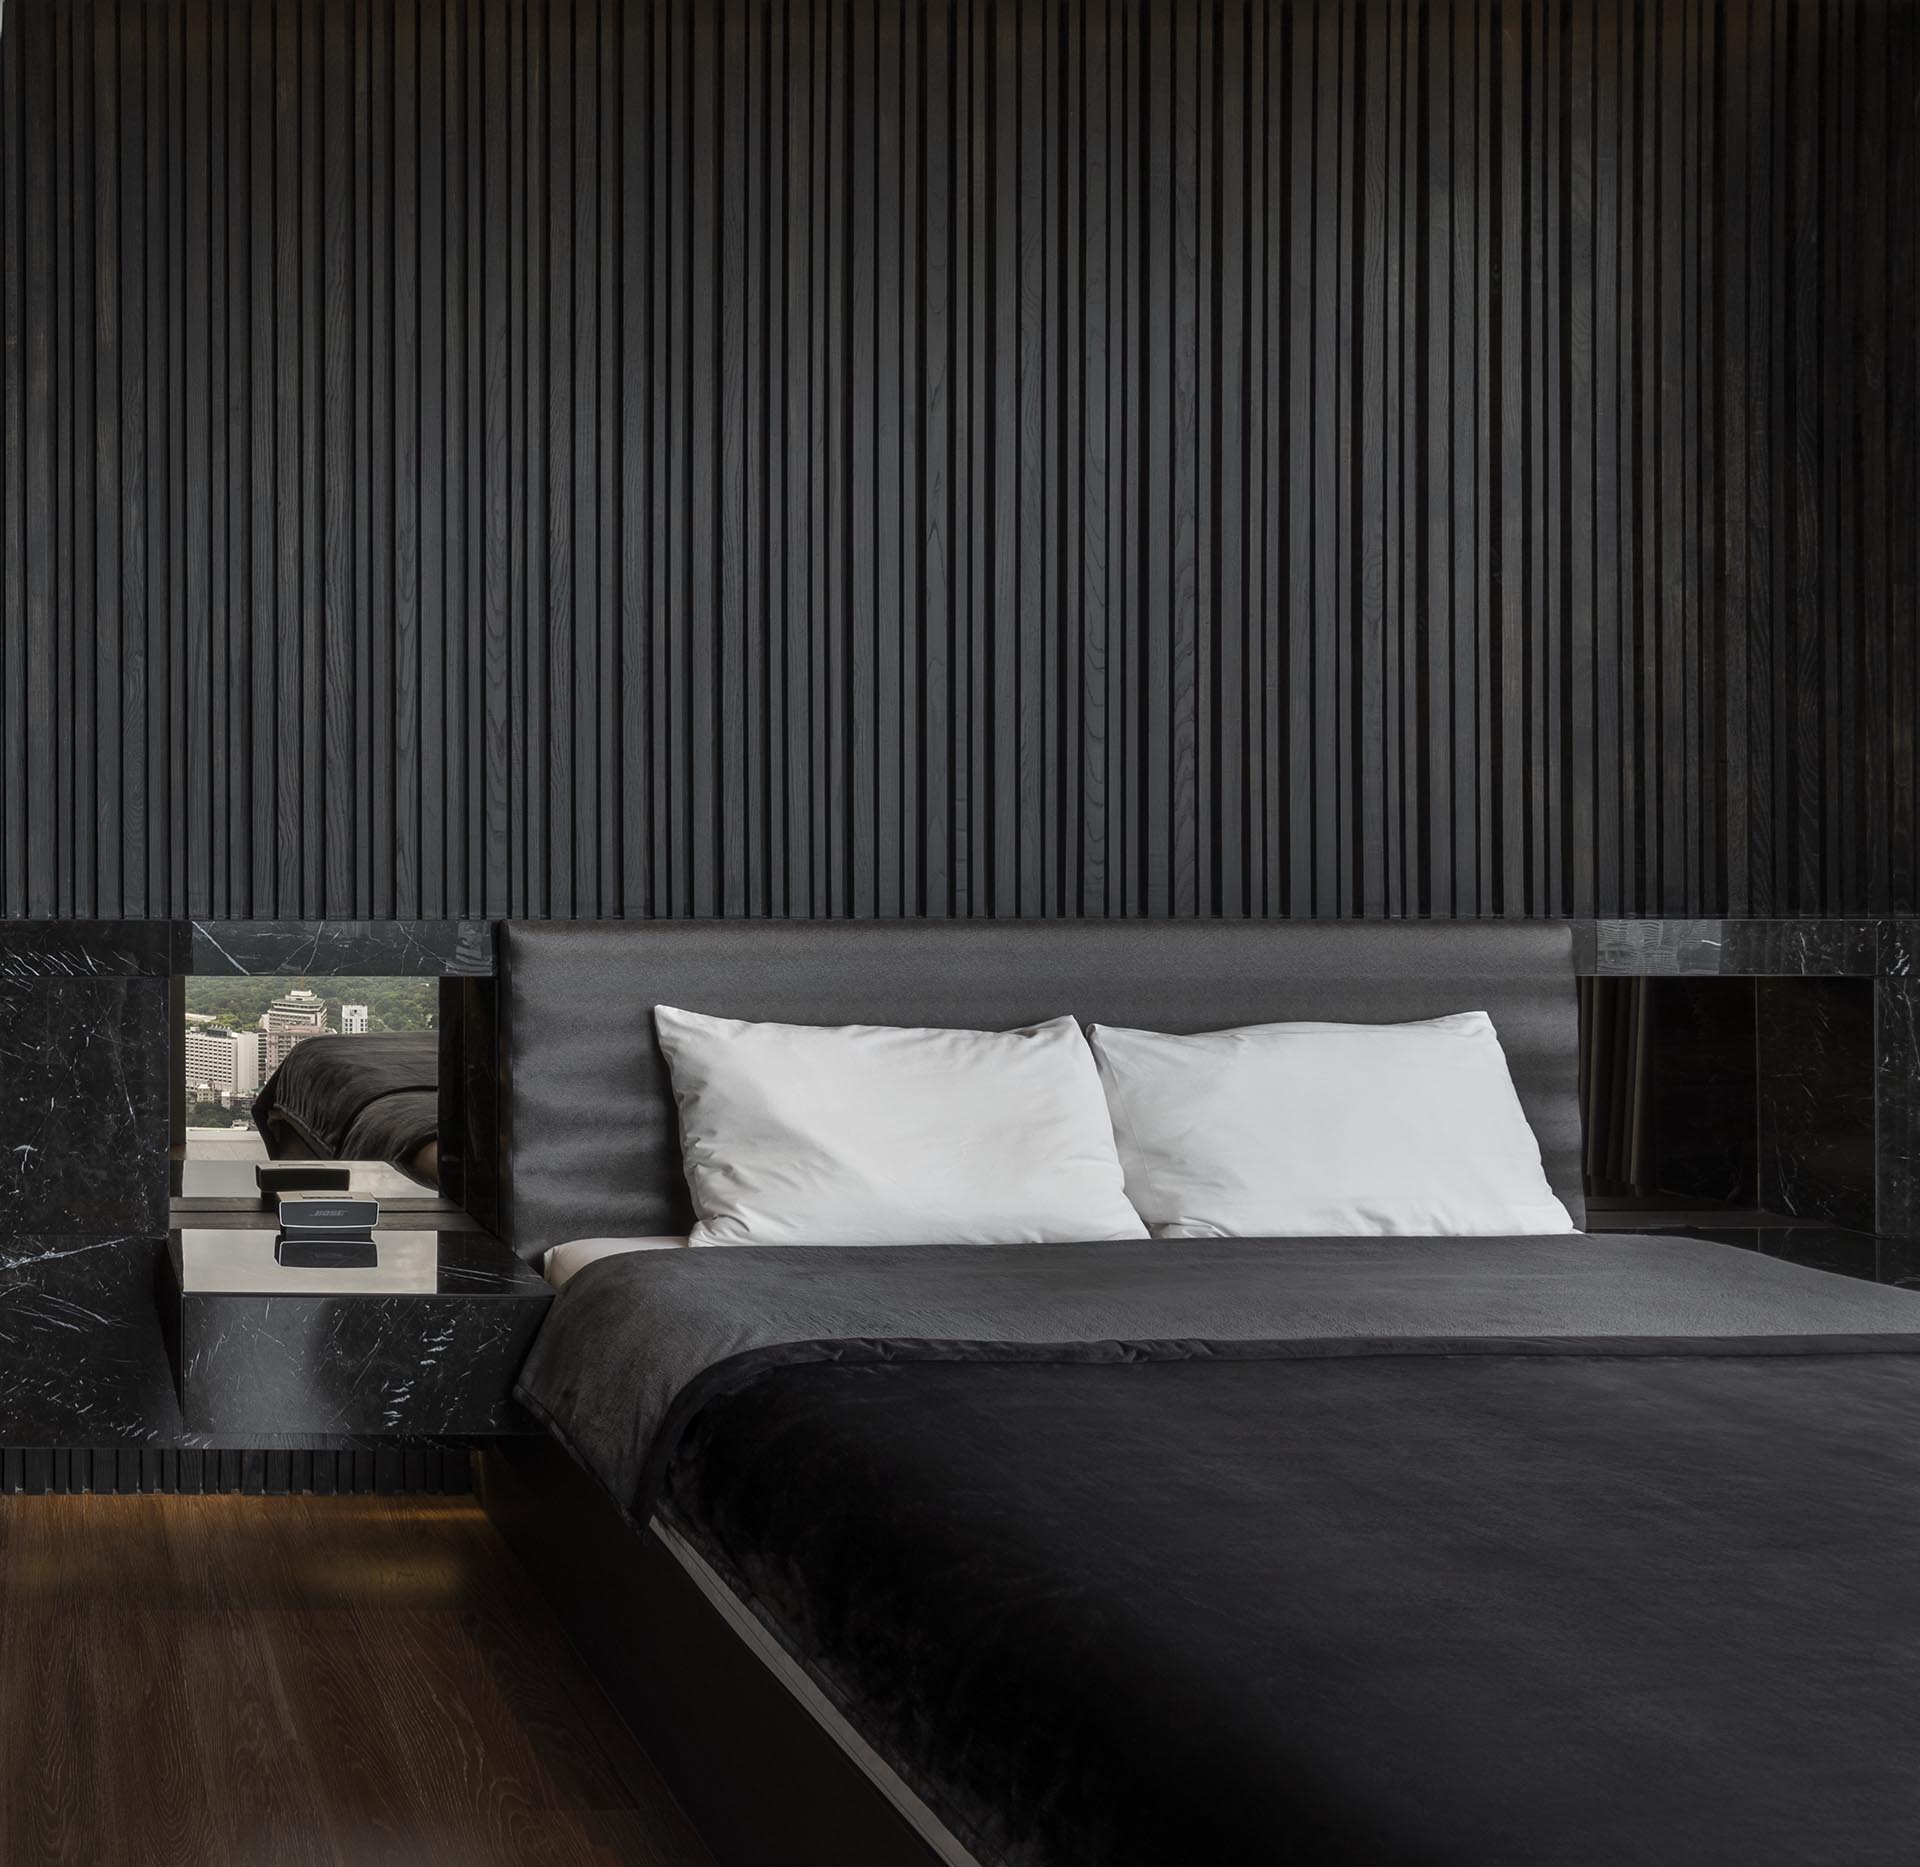 A modern black bedroom with a textured wood accent wall.